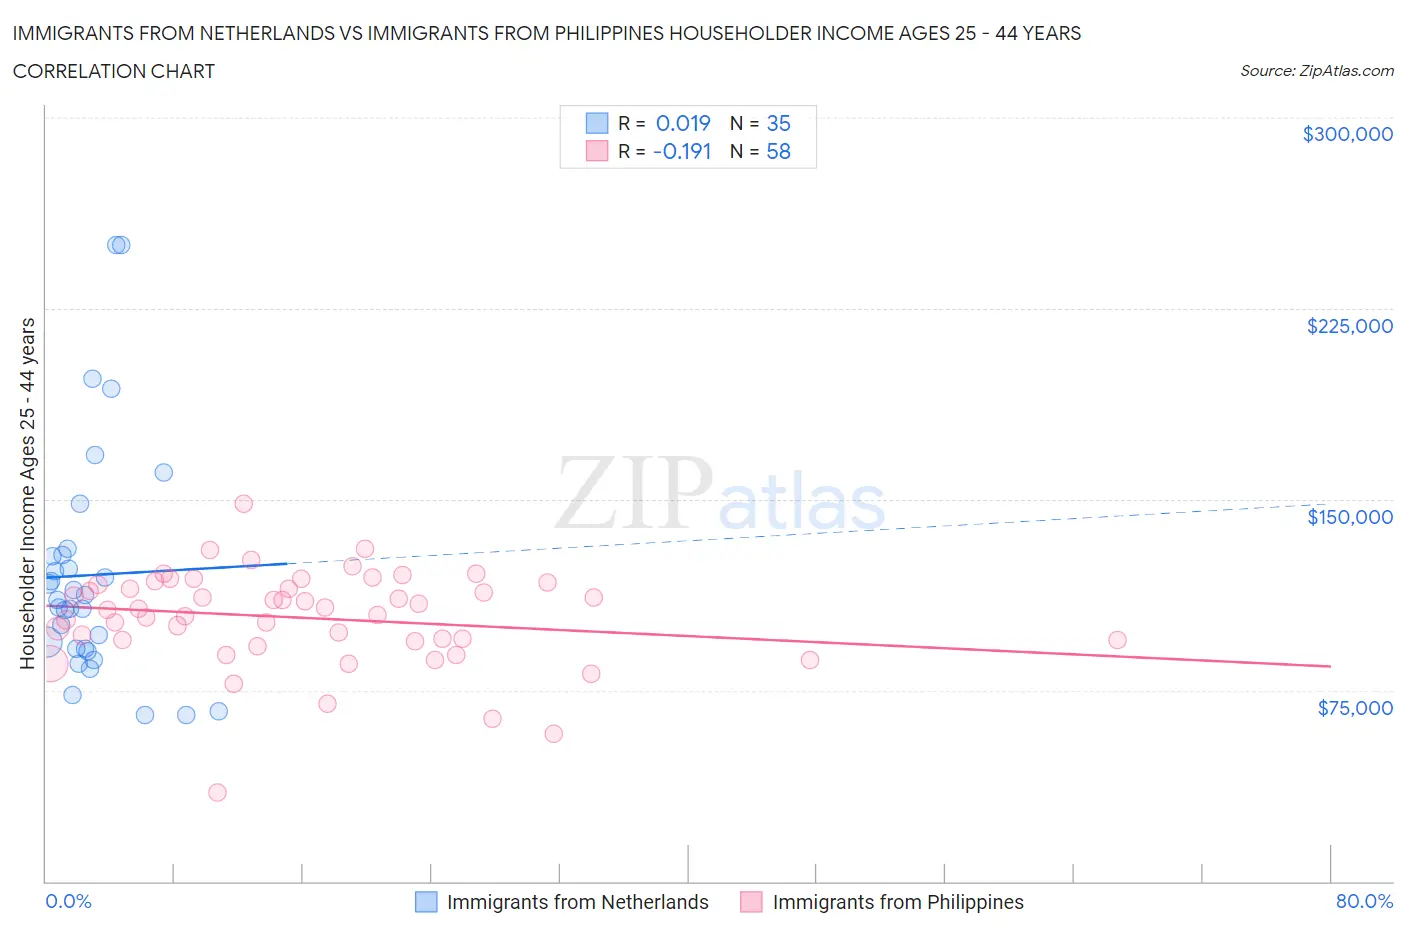 Immigrants from Netherlands vs Immigrants from Philippines Householder Income Ages 25 - 44 years